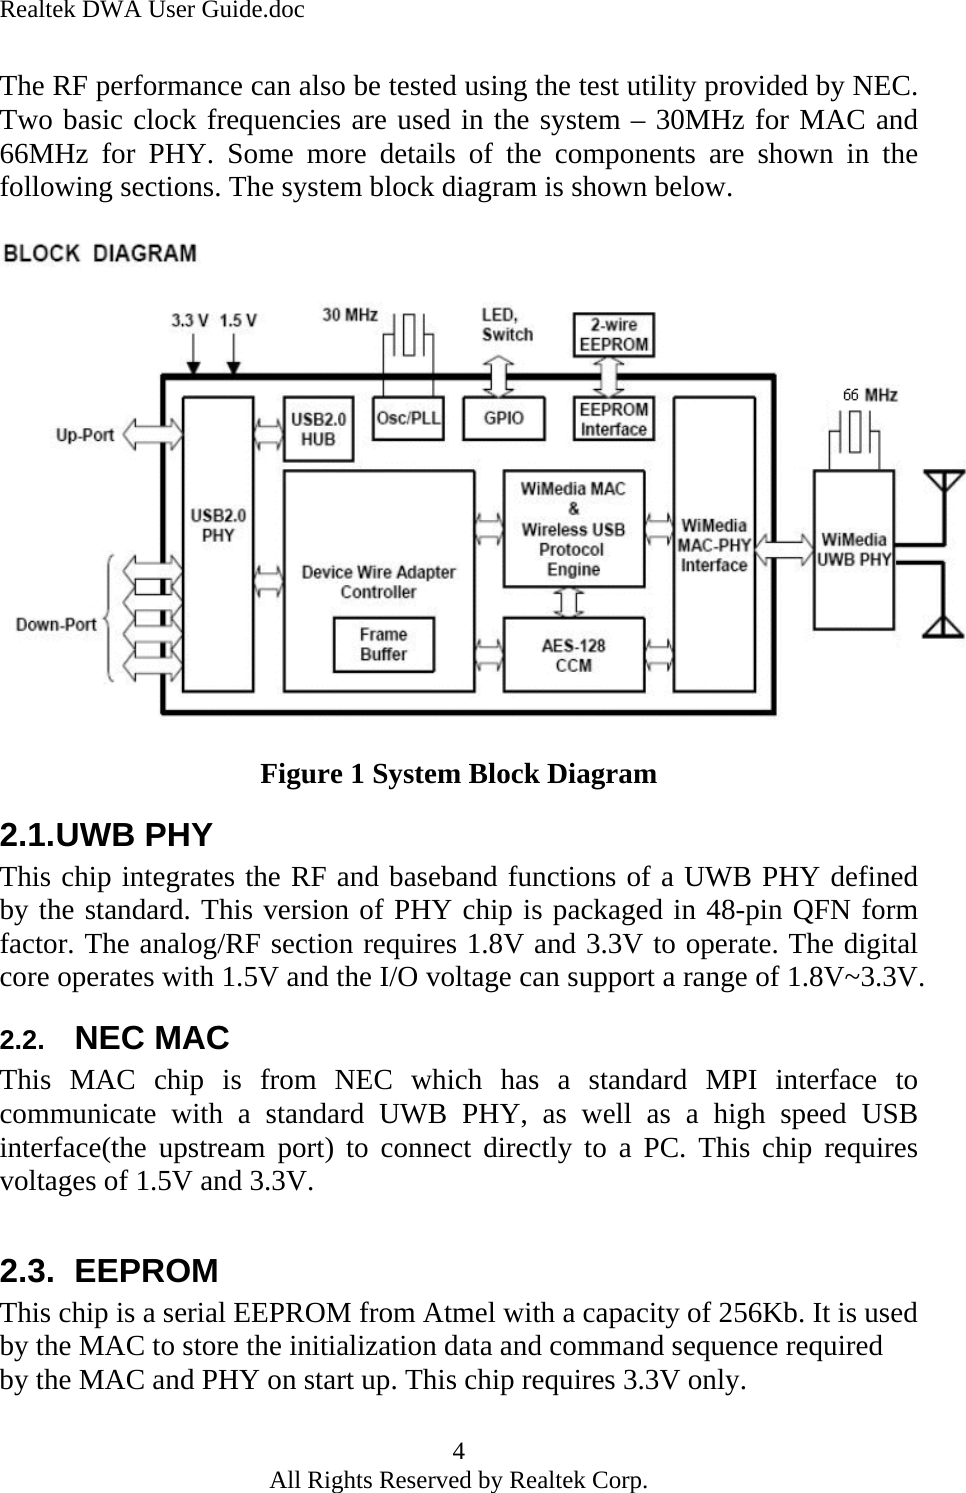 Realtek DWA User Guide.doc The RF performance can also be tested using the test utility provided by NEC. Two basic clock frequencies are used in the system – 30MHz for MAC and 66MHz for PHY. Some more details of the components are shown in the following sections. The system block diagram is shown below.    Figure 1 System Block Diagram 2.1. UWB PHY This chip integrates the RF and baseband functions of a UWB PHY defined by the standard. This version of PHY chip is packaged in 48-pin QFN form factor. The analog/RF section requires 1.8V and 3.3V to operate. The digital core operates with 1.5V and the I/O voltage can support a range of 1.8V~3.3V.  2.2.  NEC MAC This MAC chip is from NEC which has a standard MPI interface to communicate with a standard UWB PHY, as well as a high speed USB interface(the upstream port) to connect directly to a PC. This chip requires voltages of 1.5V and 3.3V.  2.3. EEPROM This chip is a serial EEPROM from Atmel with a capacity of 256Kb. It is used by the MAC to store the initialization data and command sequence required by the MAC and PHY on start up. This chip requires 3.3V only. 4 All Rights Reserved by Realtek Corp. 